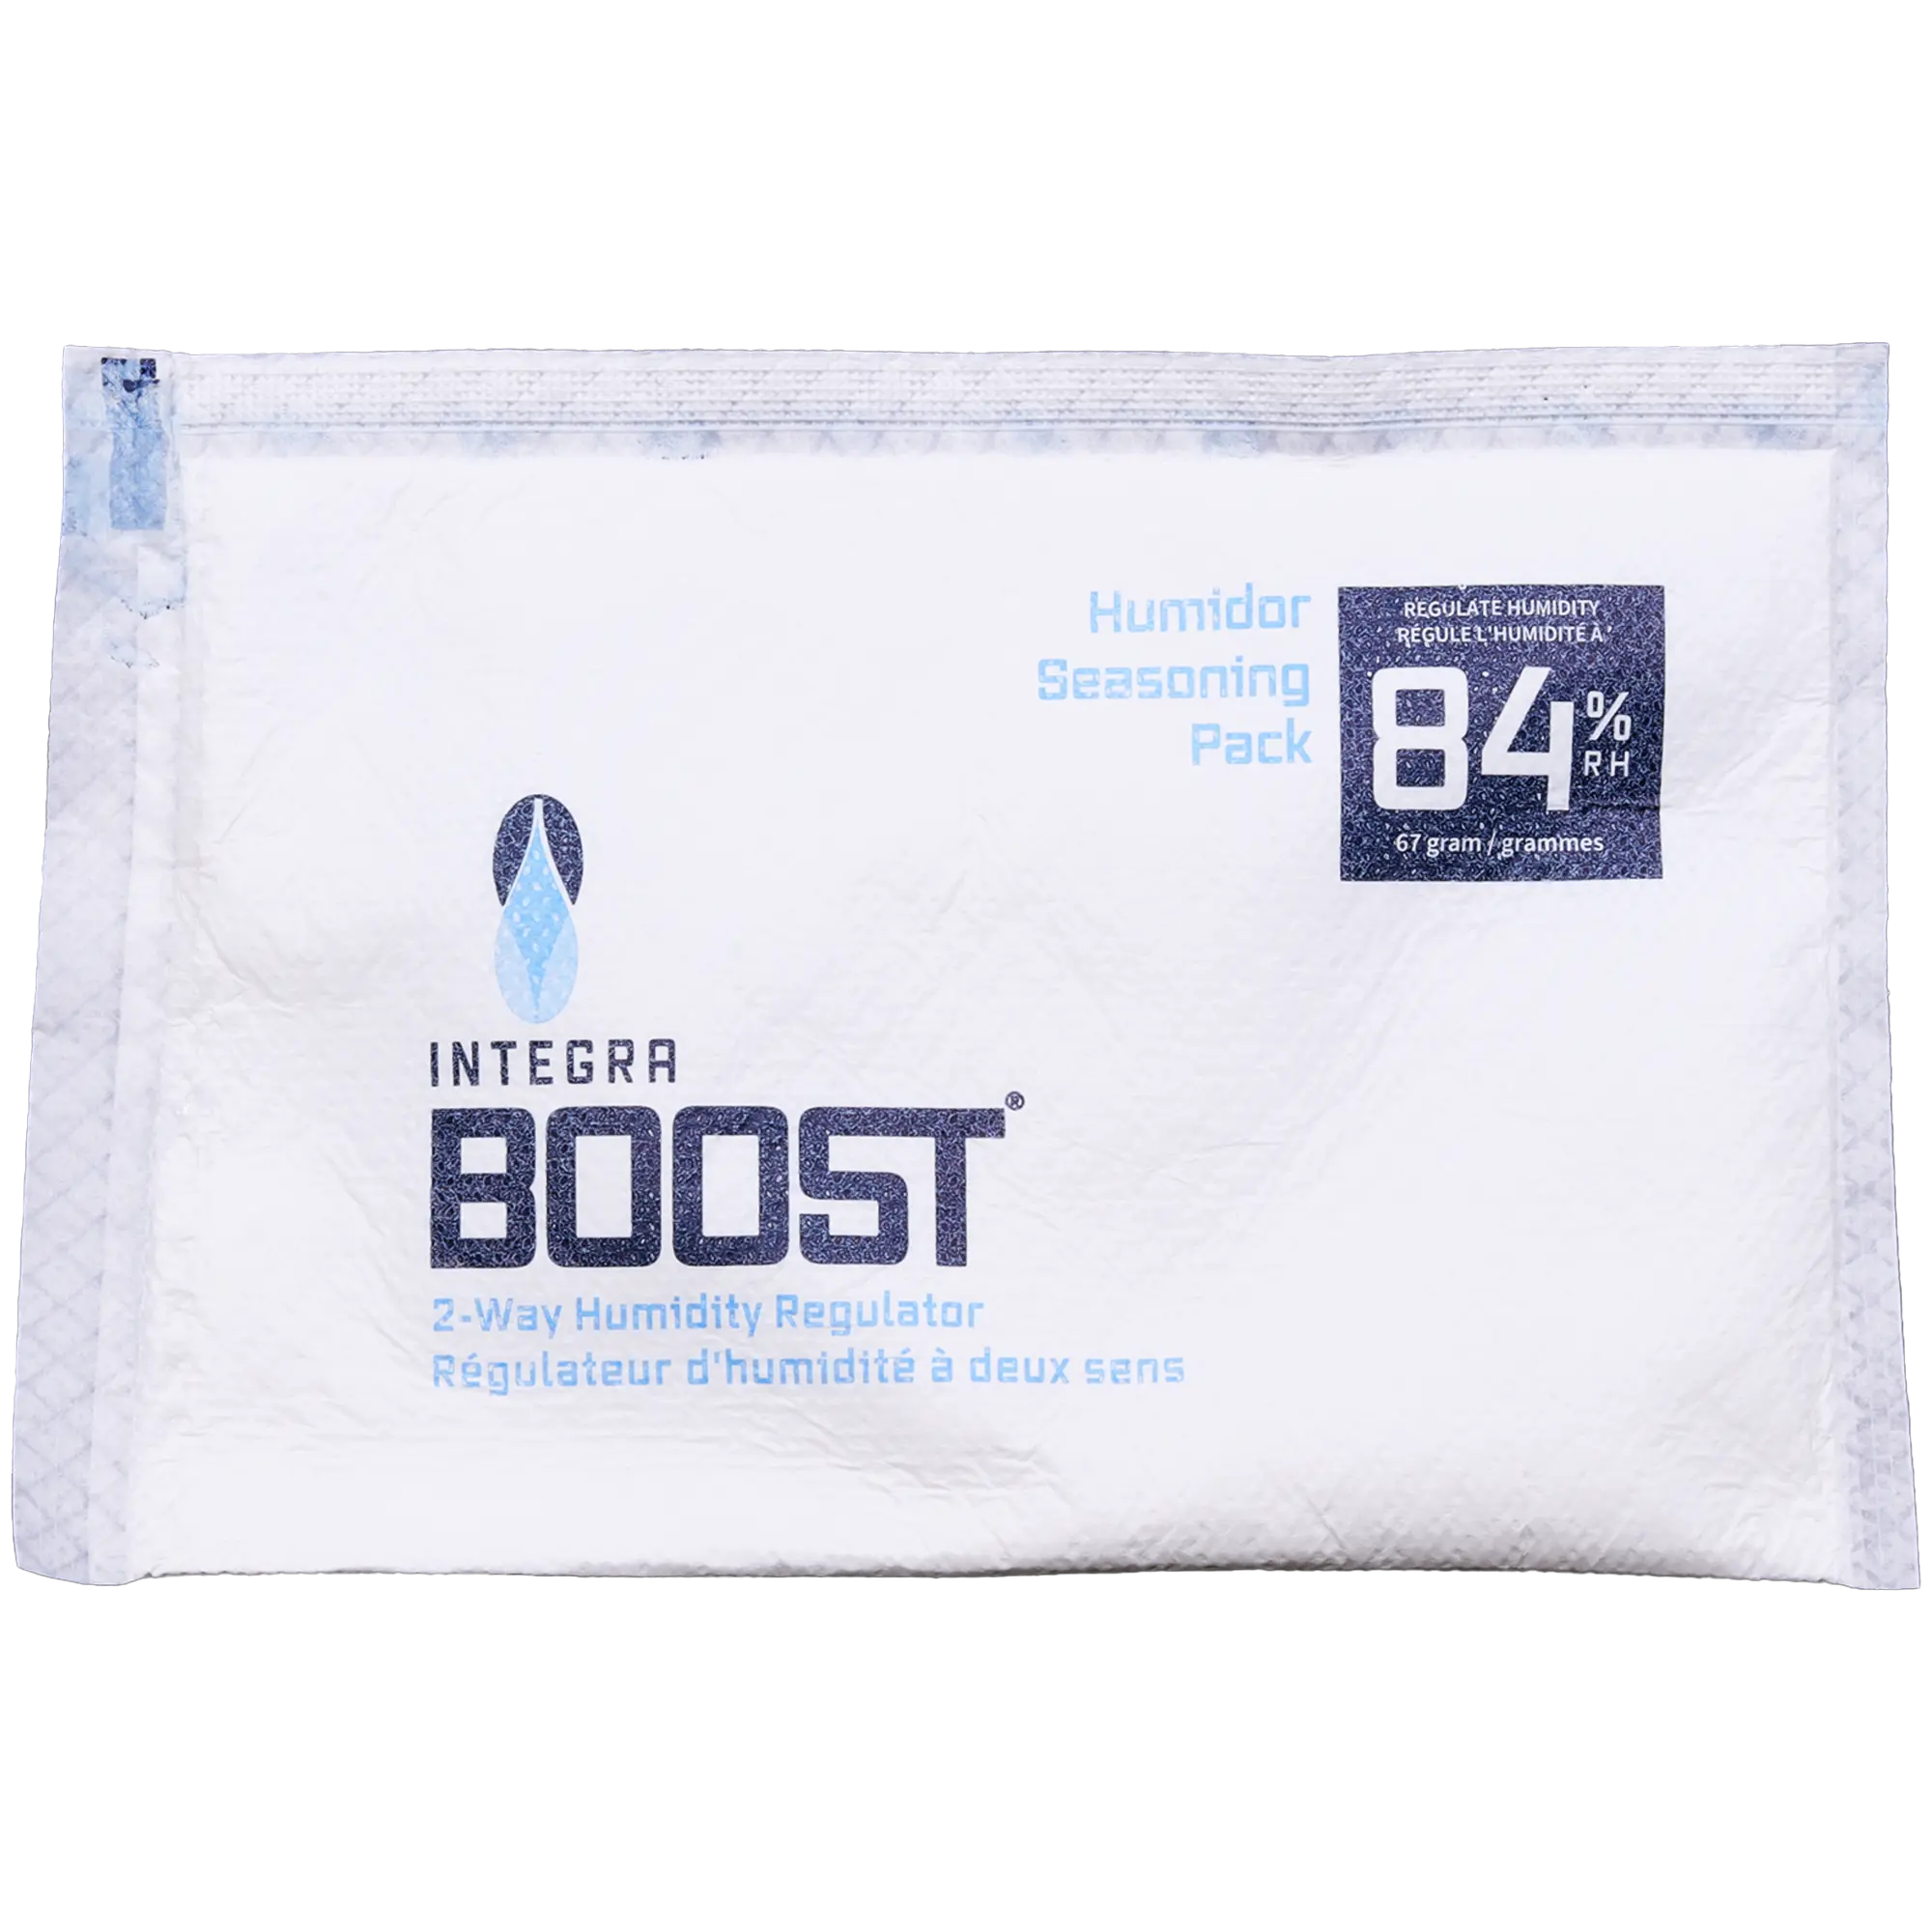 Integra Boost 67g Befeuchterpack 84% R.H.
